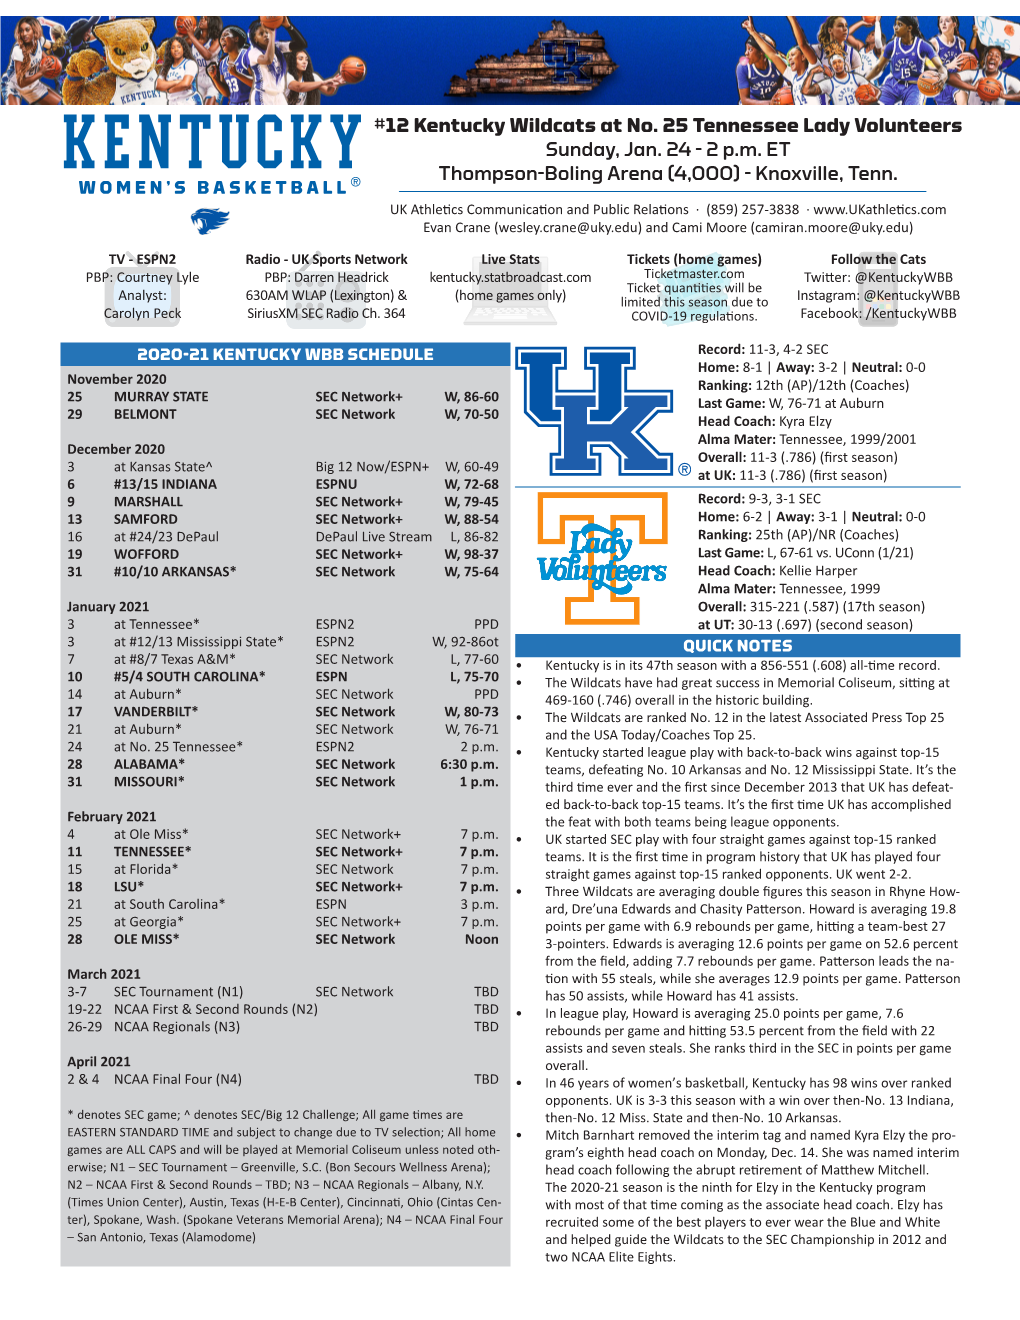 12 Kentucky Wildcats at No. 25 Tennessee Lady Volunteers Sunday, Jan. 24 - 2 P.M